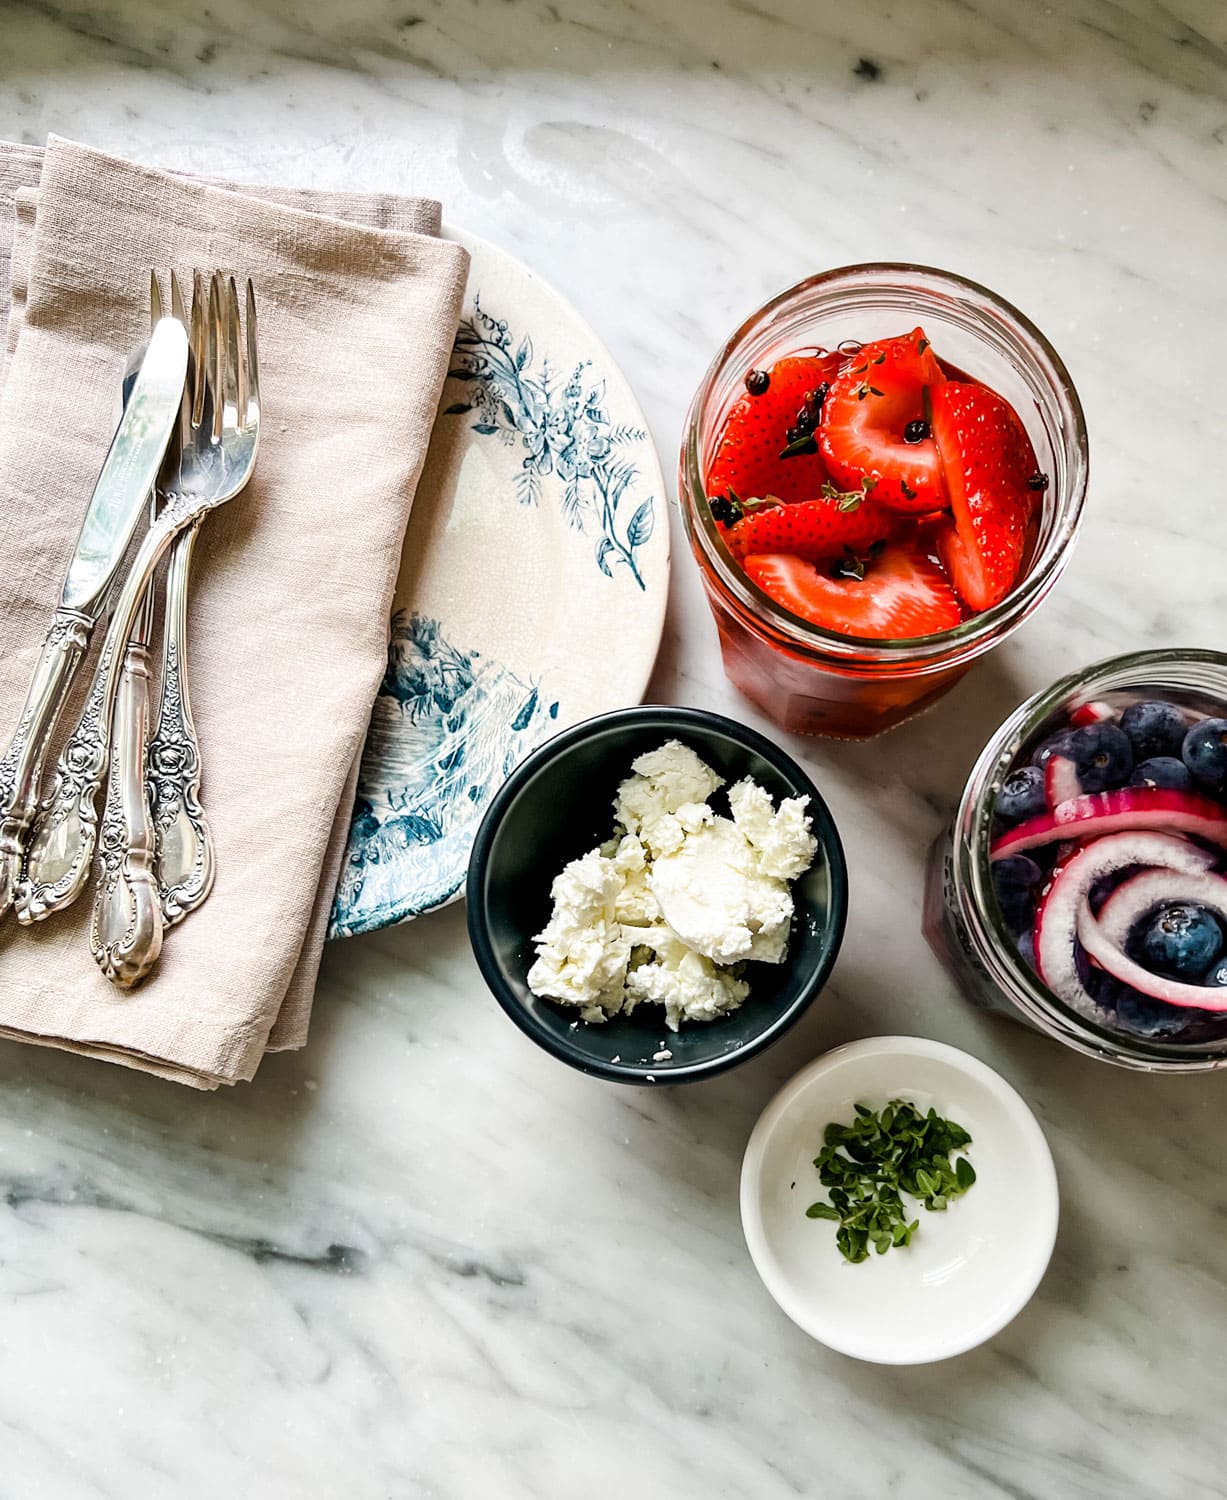  pickled strawberries and blueberries.peppercorns, vinegar, red onion, plates, silverware, chèvre 